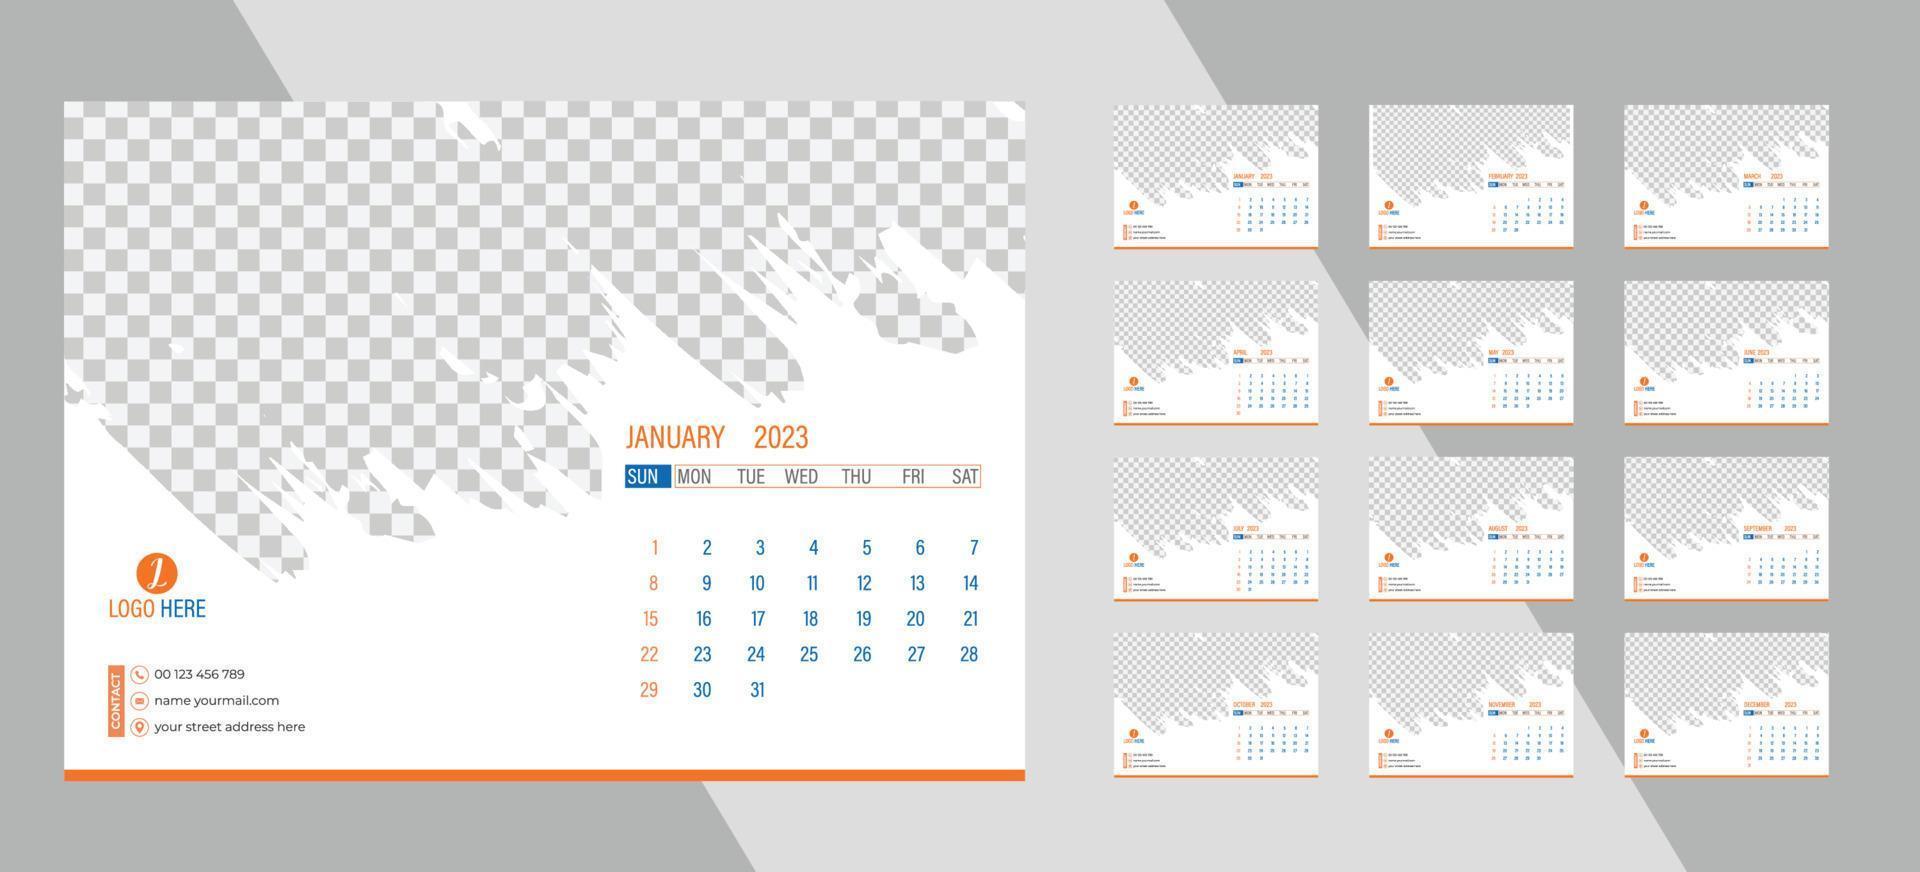 Desk Monthly Photo Calendar 2023. Simple monthly horizontal photo calendar Layout for 2023 new year in English. Cover Calendar and 12 months templates. vector